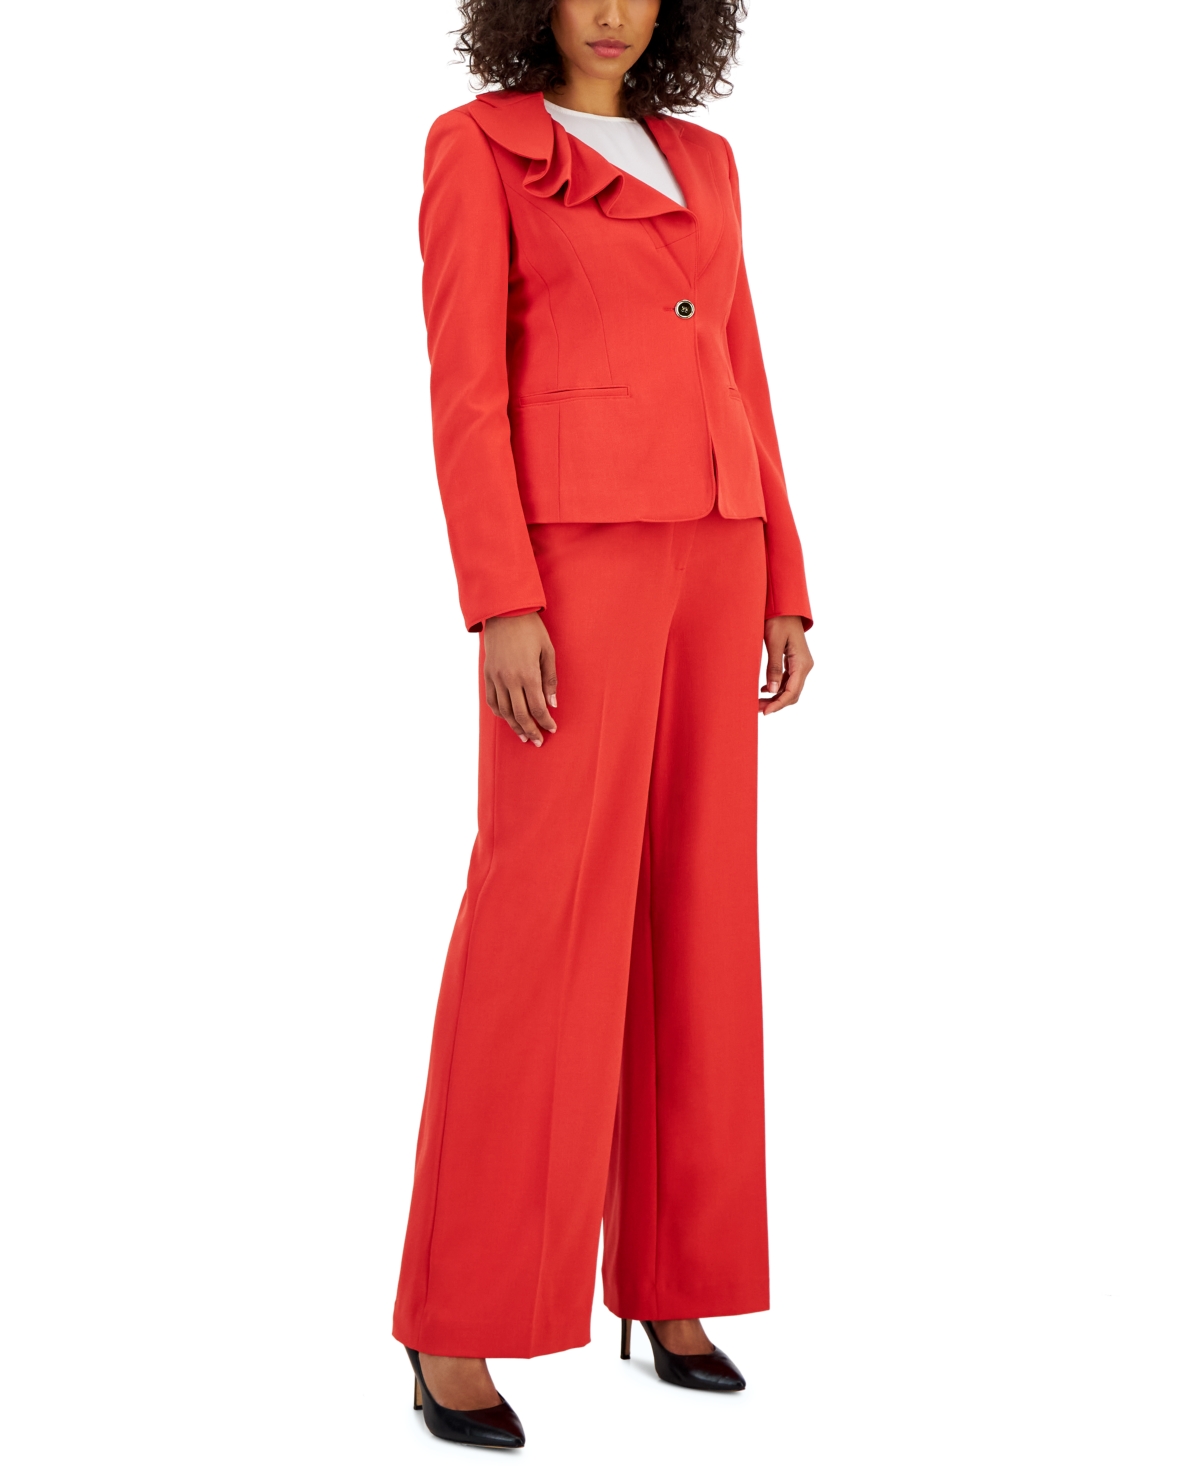 Nipon Boutique Women's Asymmetrical Ruffled One-button Jacket & Wide-leg Pant Suit In Cherry Sprig